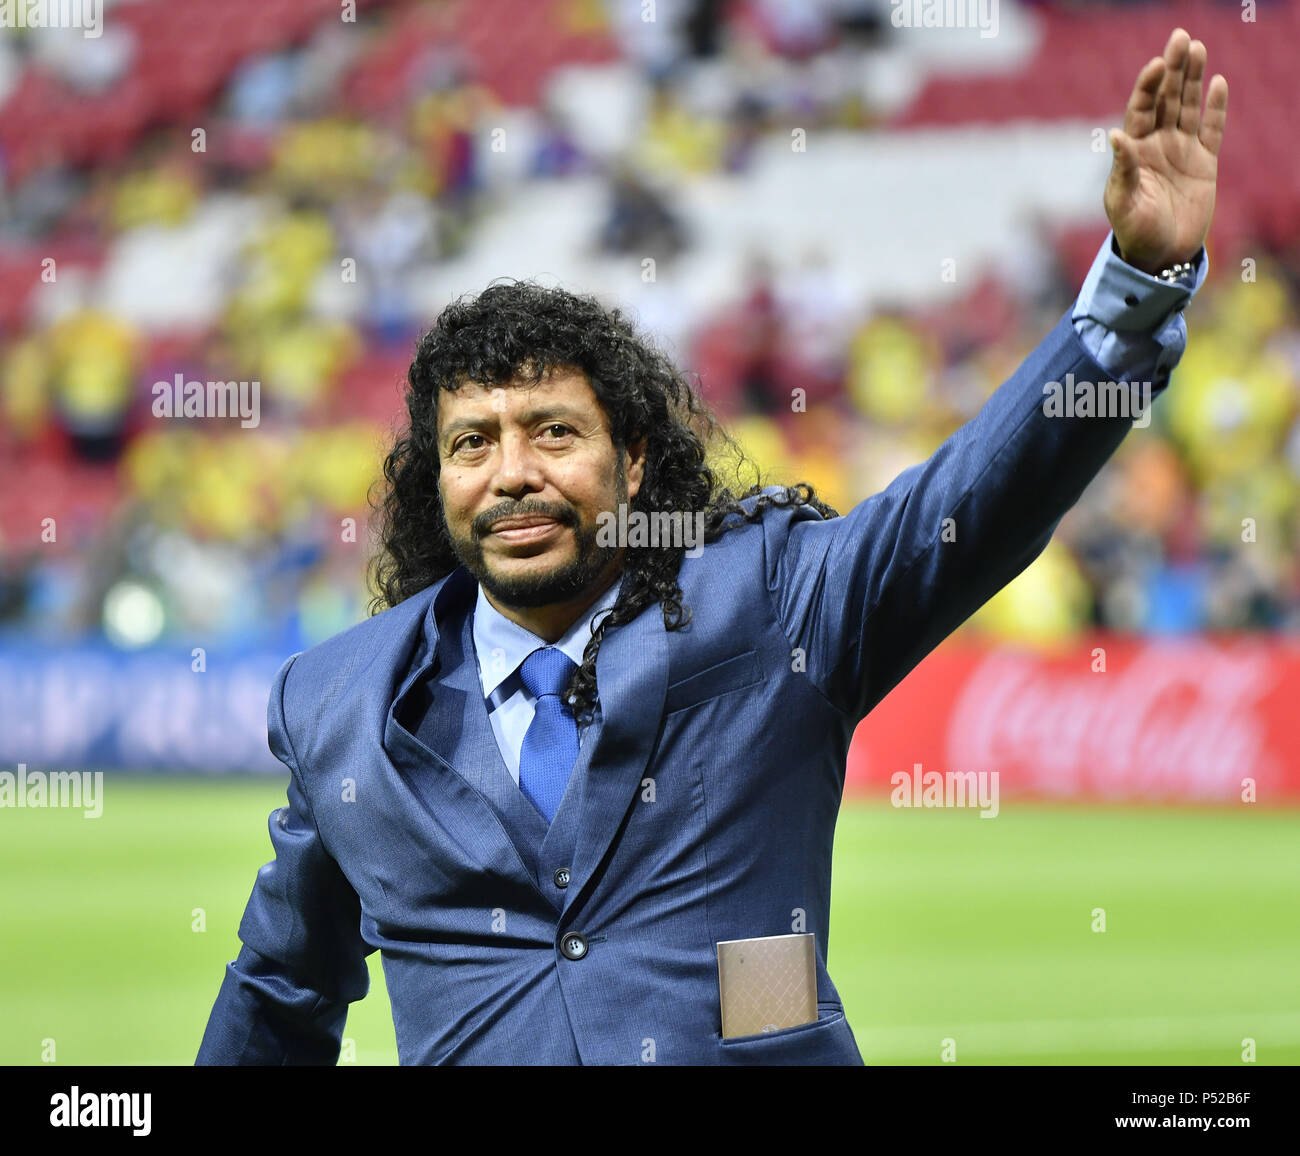 Kazan, Russia. 24th June, 2018. Former Colombia's goalkeeper Rene Higuita greets the audience prior to the 2018 FIFA World Cup Group H match between Poland and Colombia in Kazan, Russia, June 24, 2018. Credit: He Canling/Xinhua/Alamy Live News Stock Photo